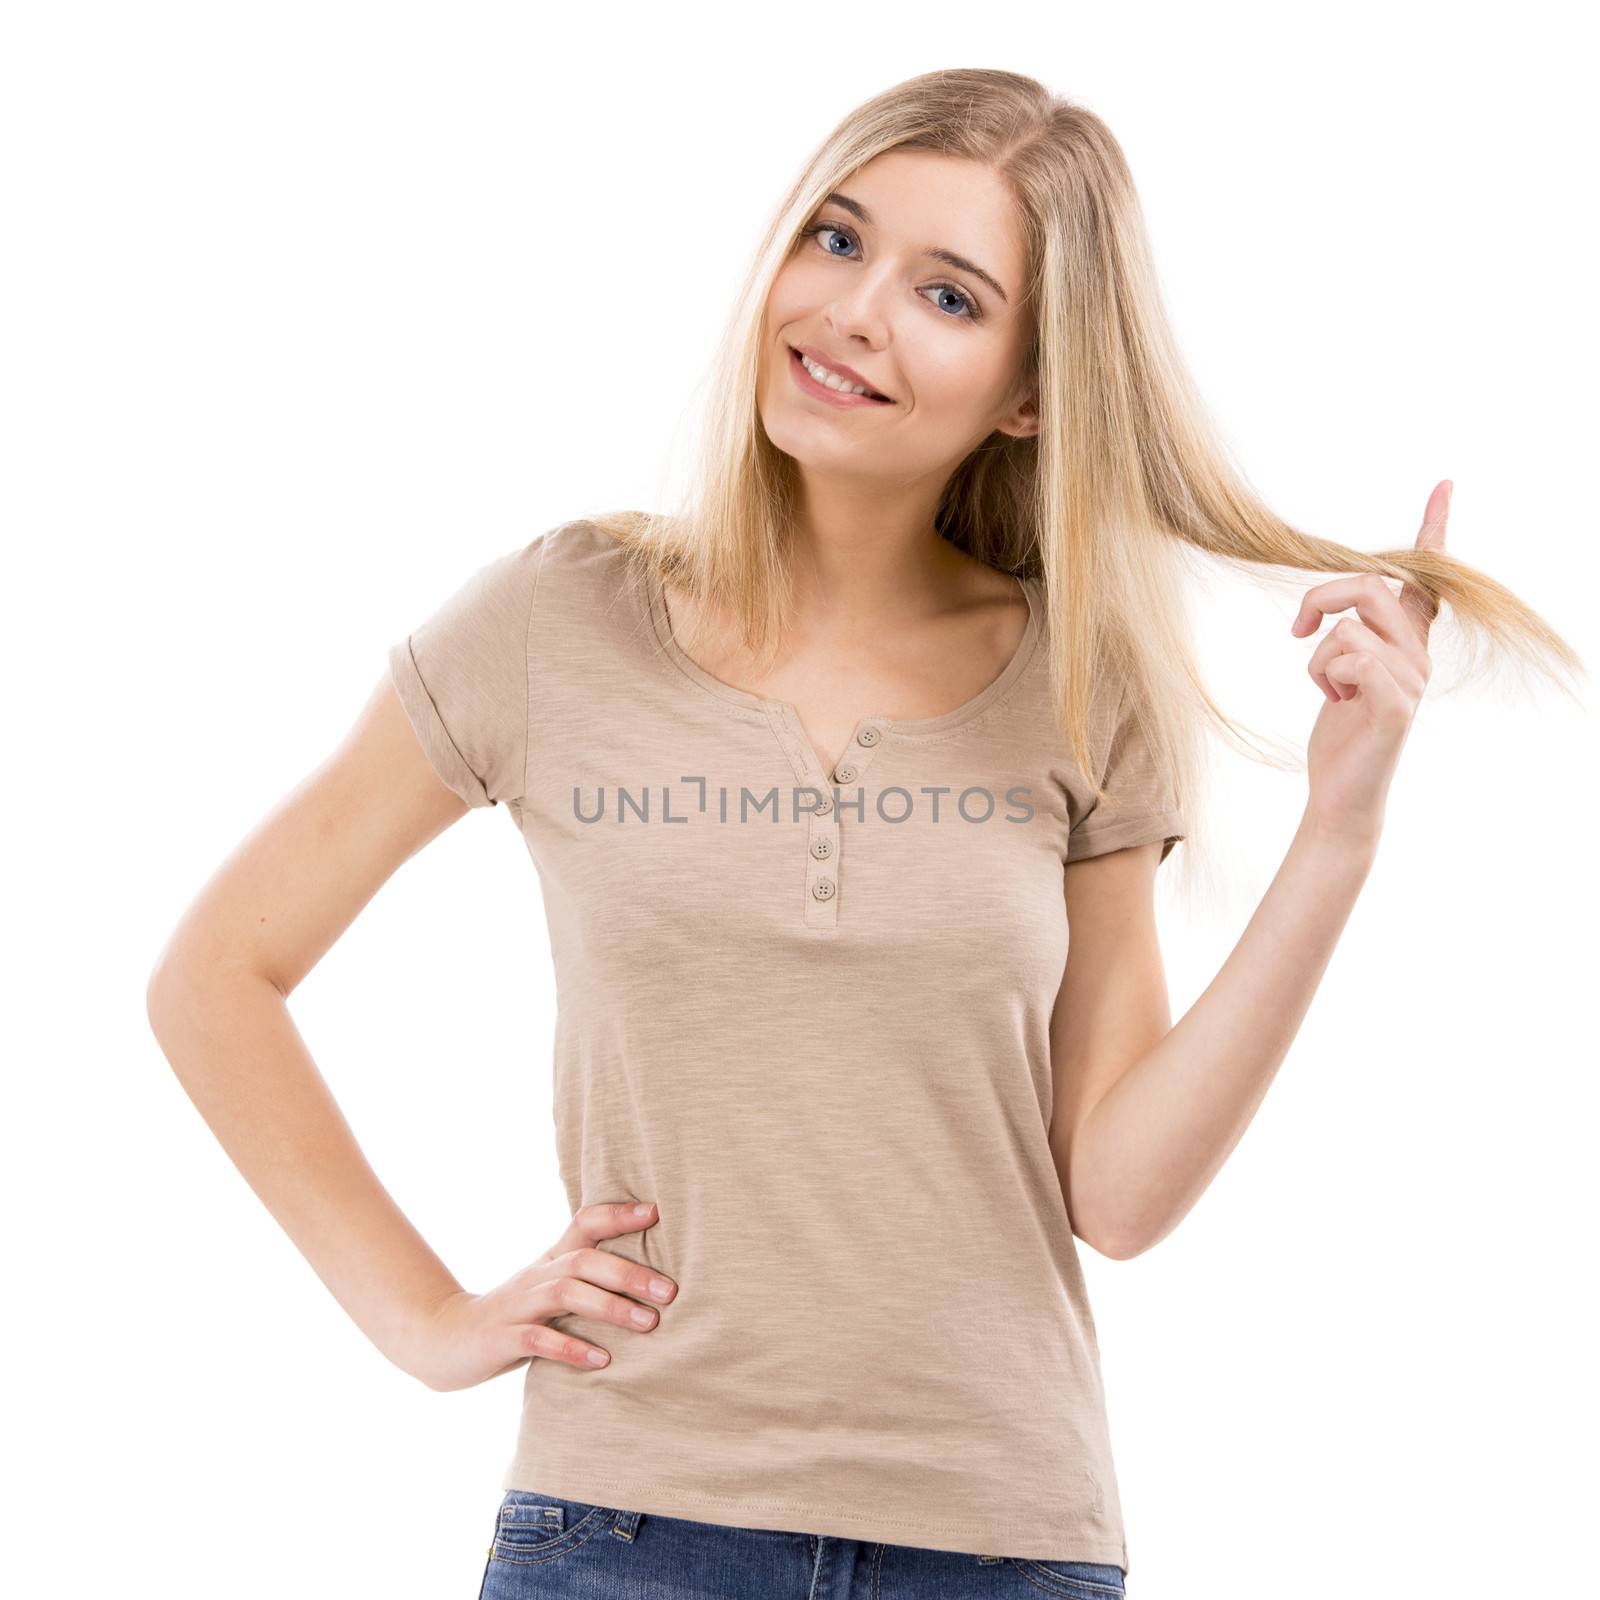 Beautiful blonde woman smiling and touching her hair, isolated over white background